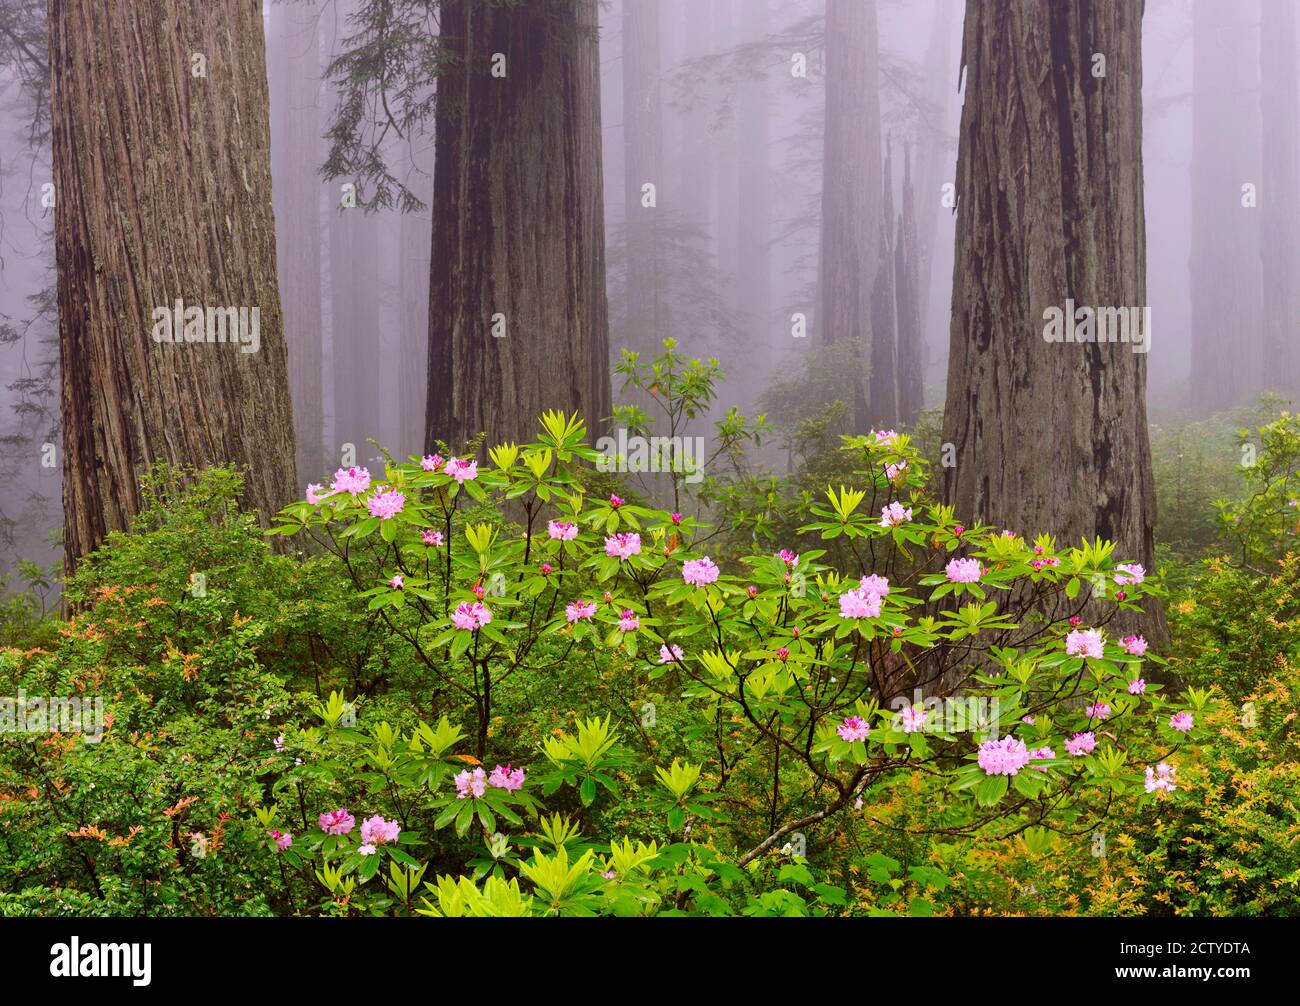 Rhododendron flowers in a forest, Del Norte Coast State Park, Redwood National Park, Humboldt County, California, USA Stock Photo